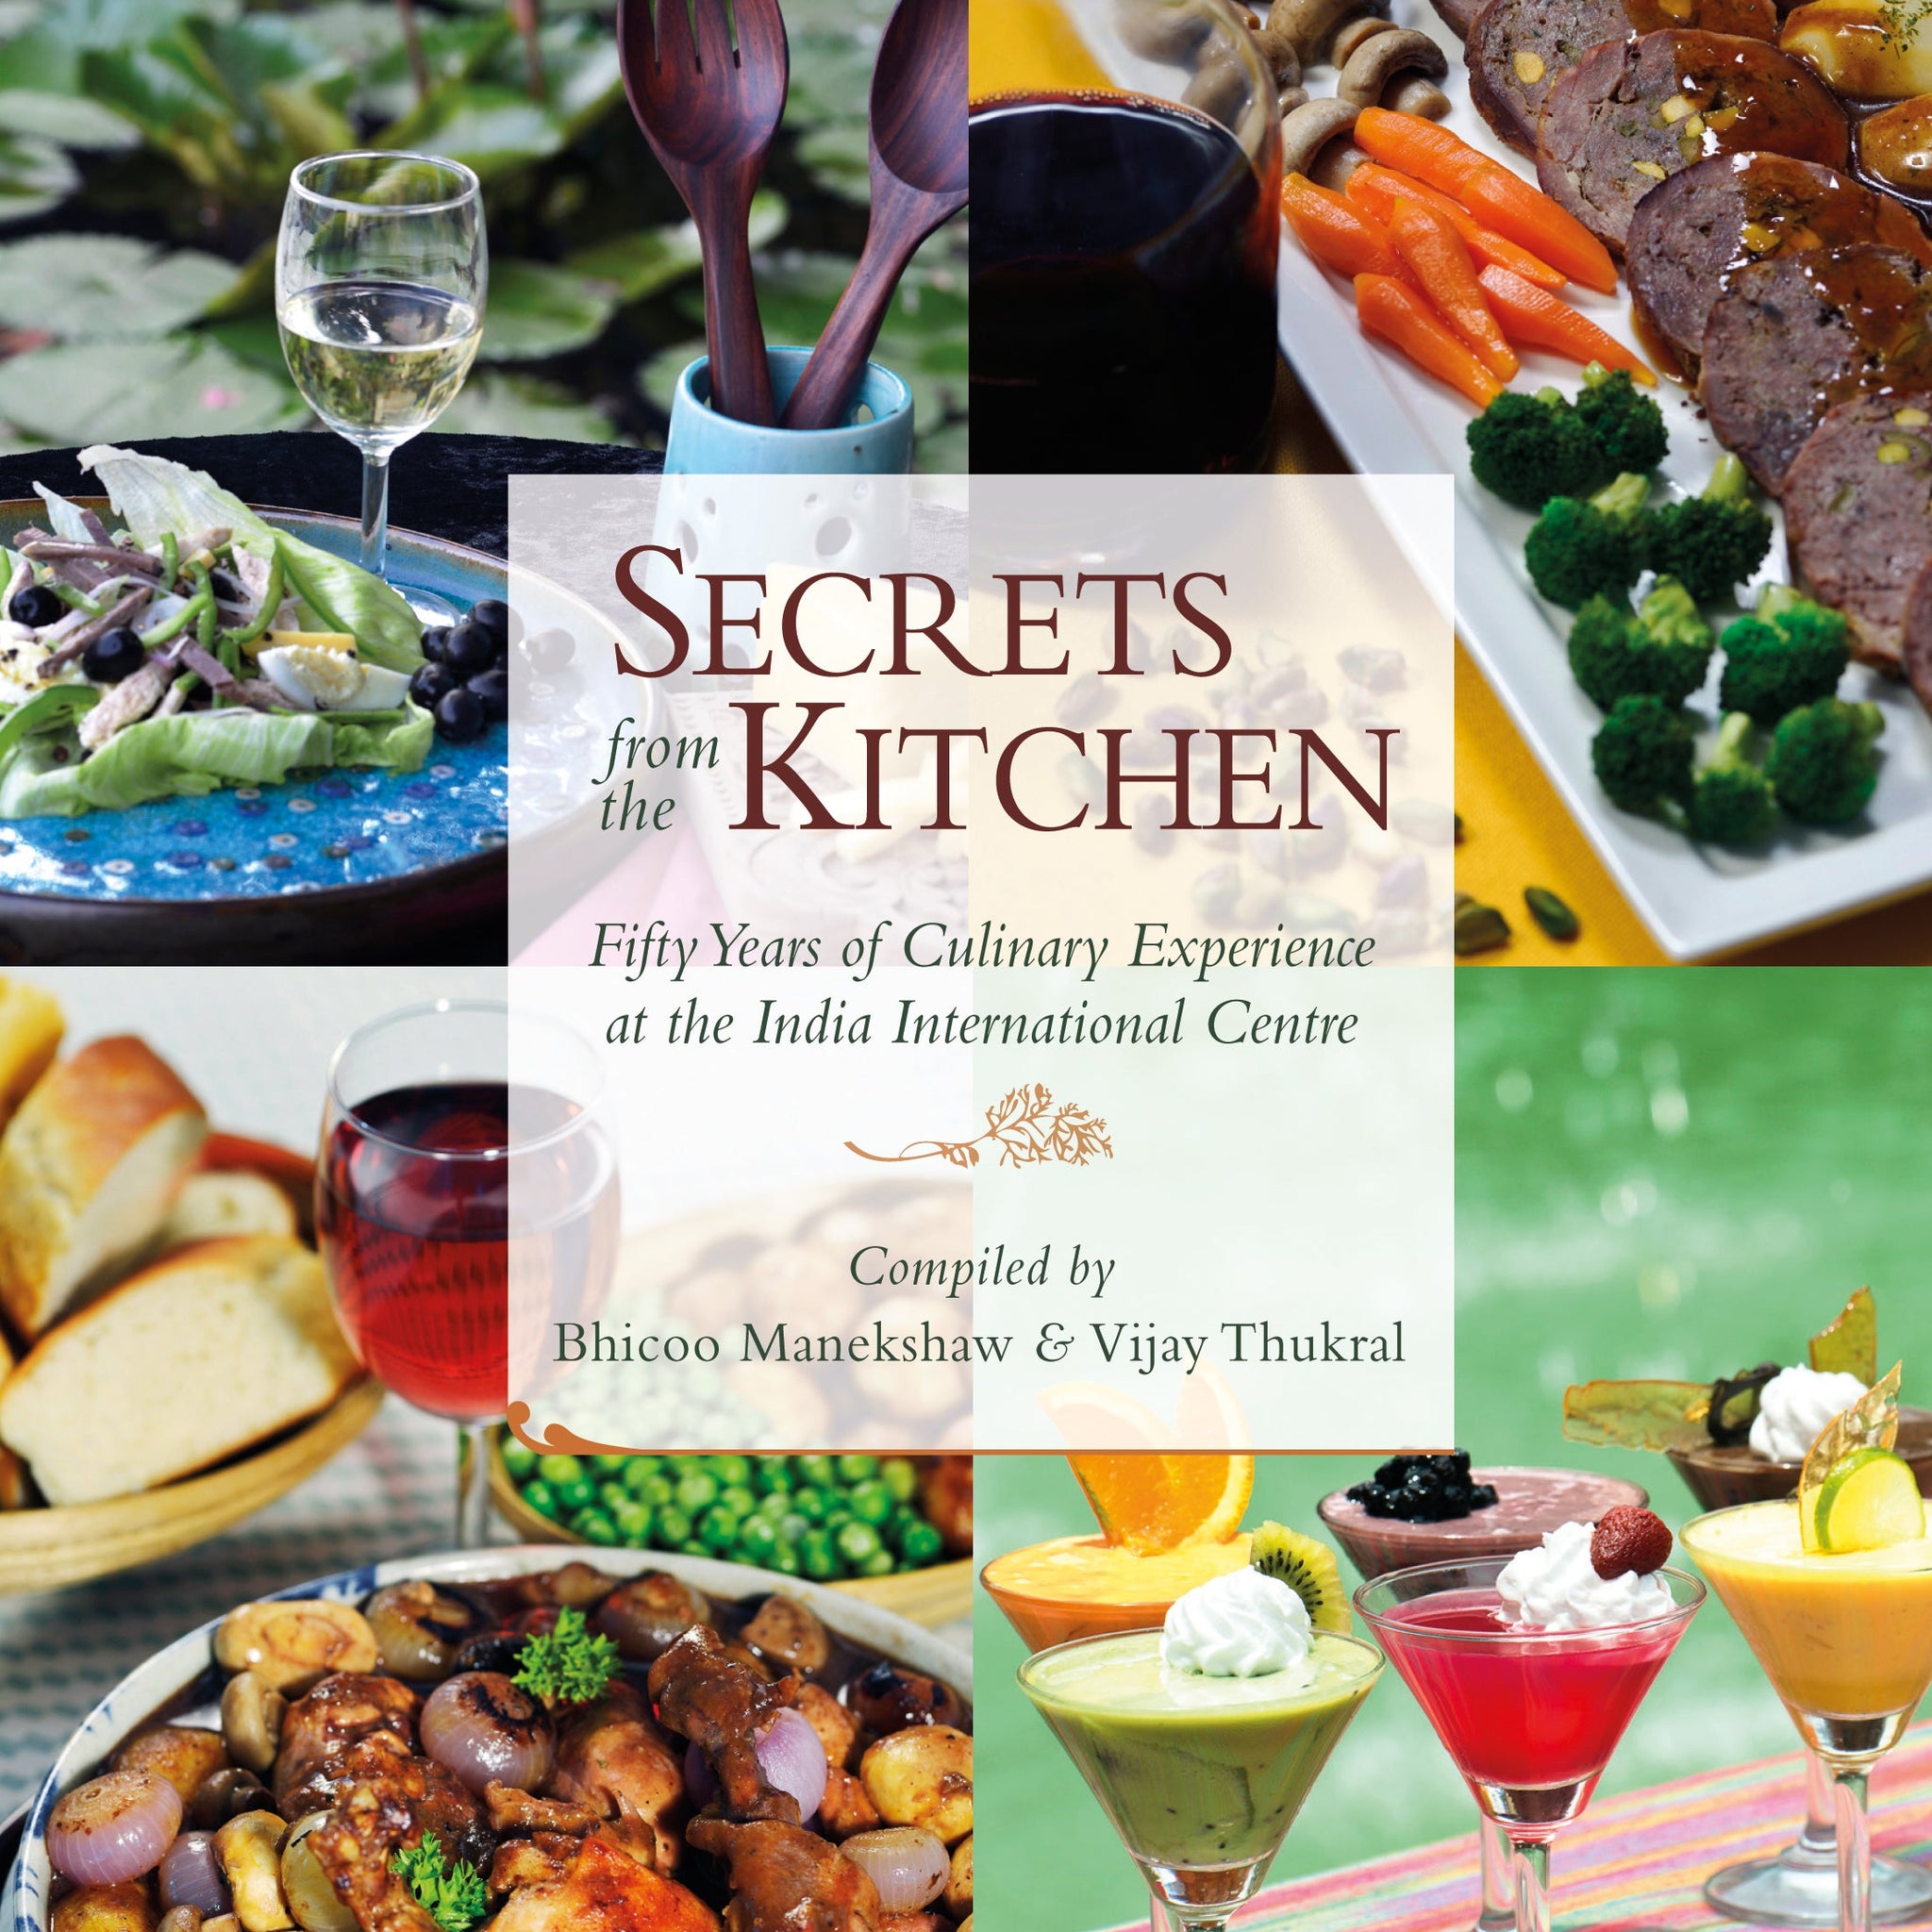 Secrets from the Kitchen: Fifty Years of Culinary Experience at the India International Centre